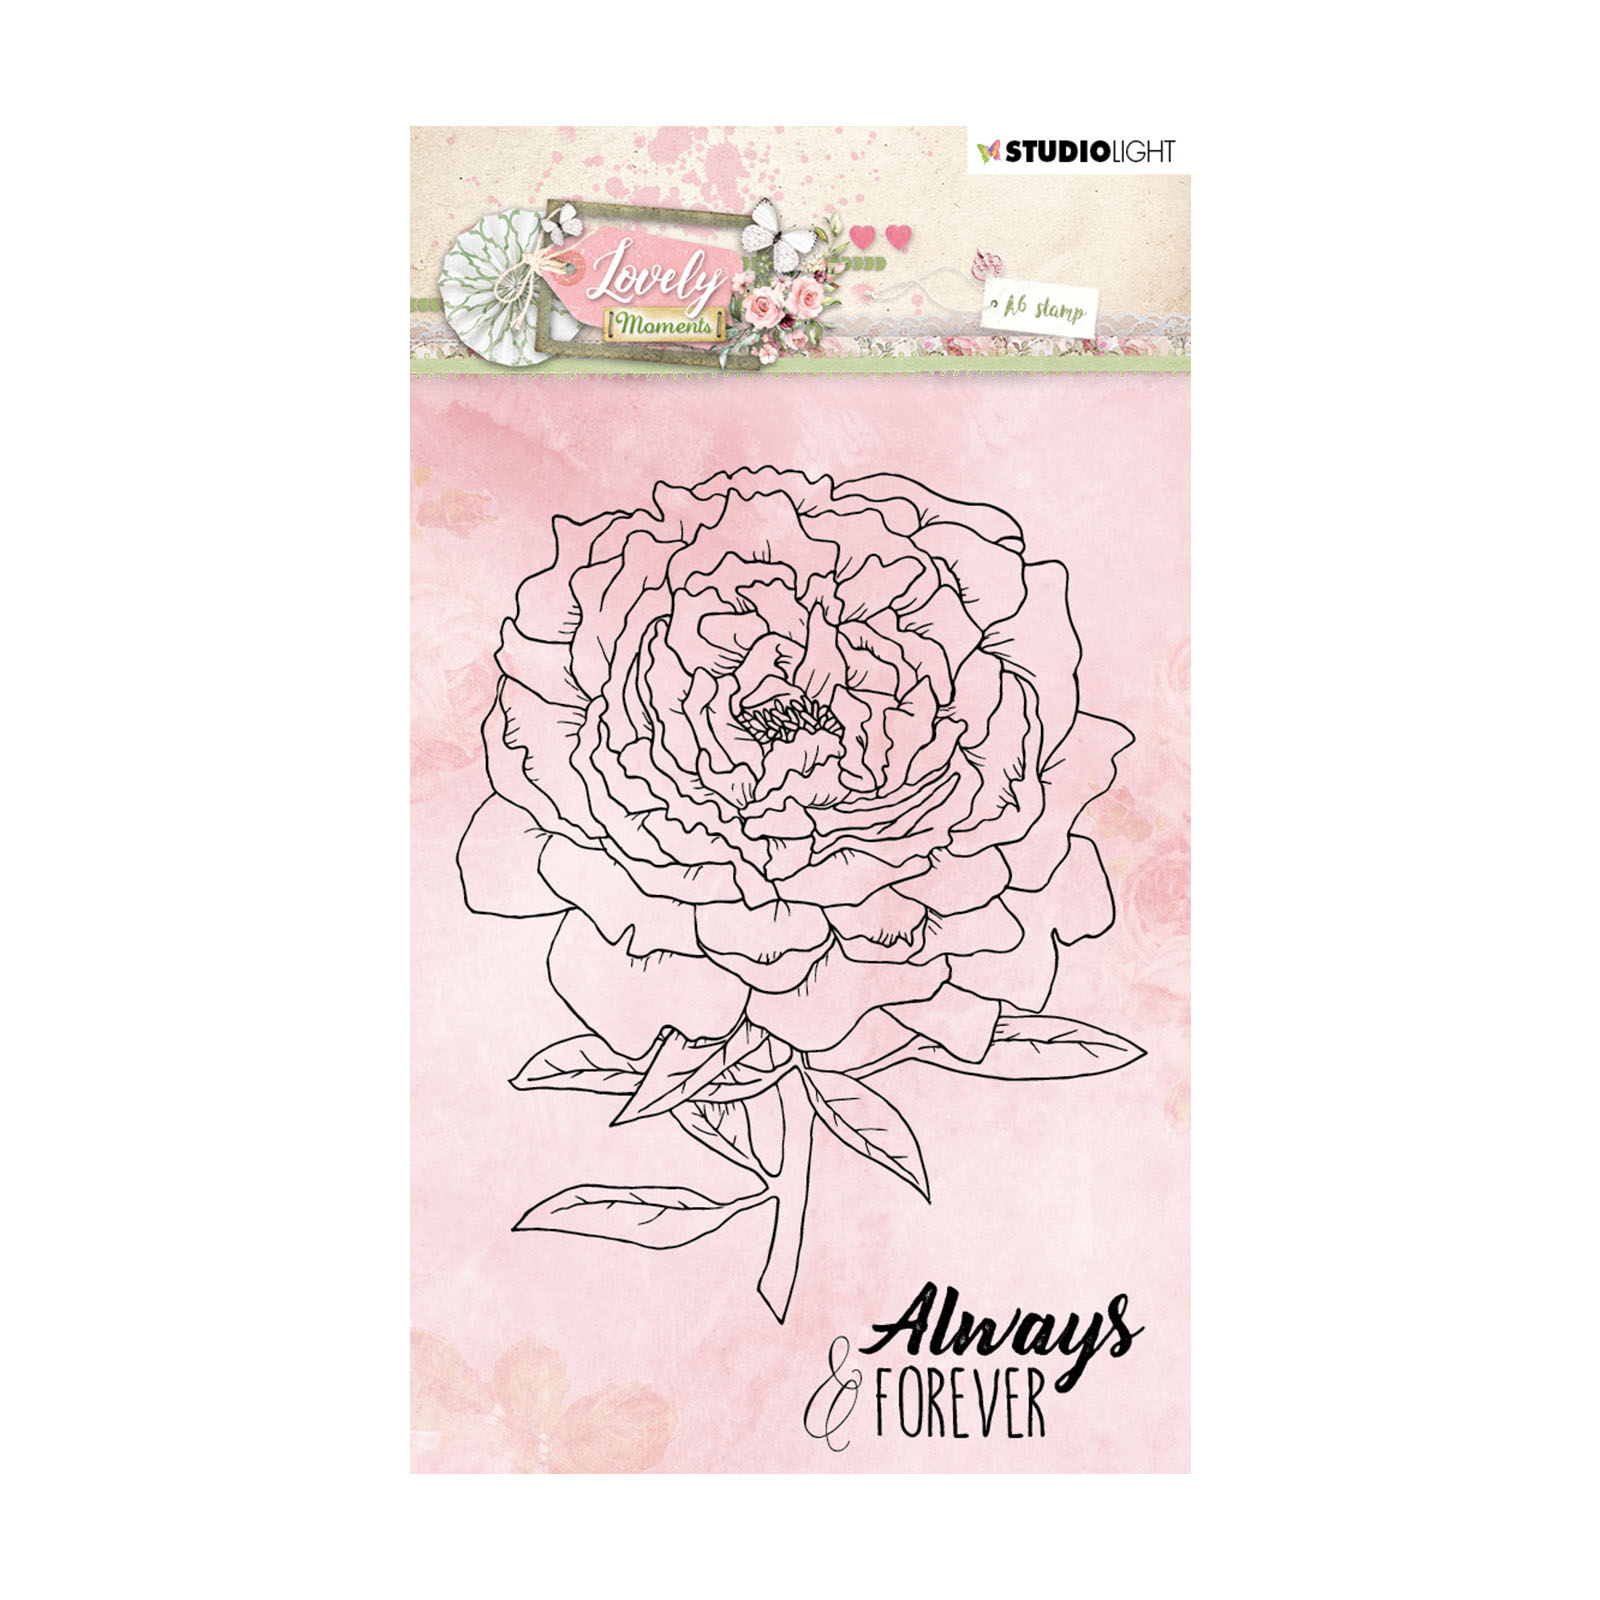 Studio Light • Clear stamp A6 Lovely Moments Nr.386